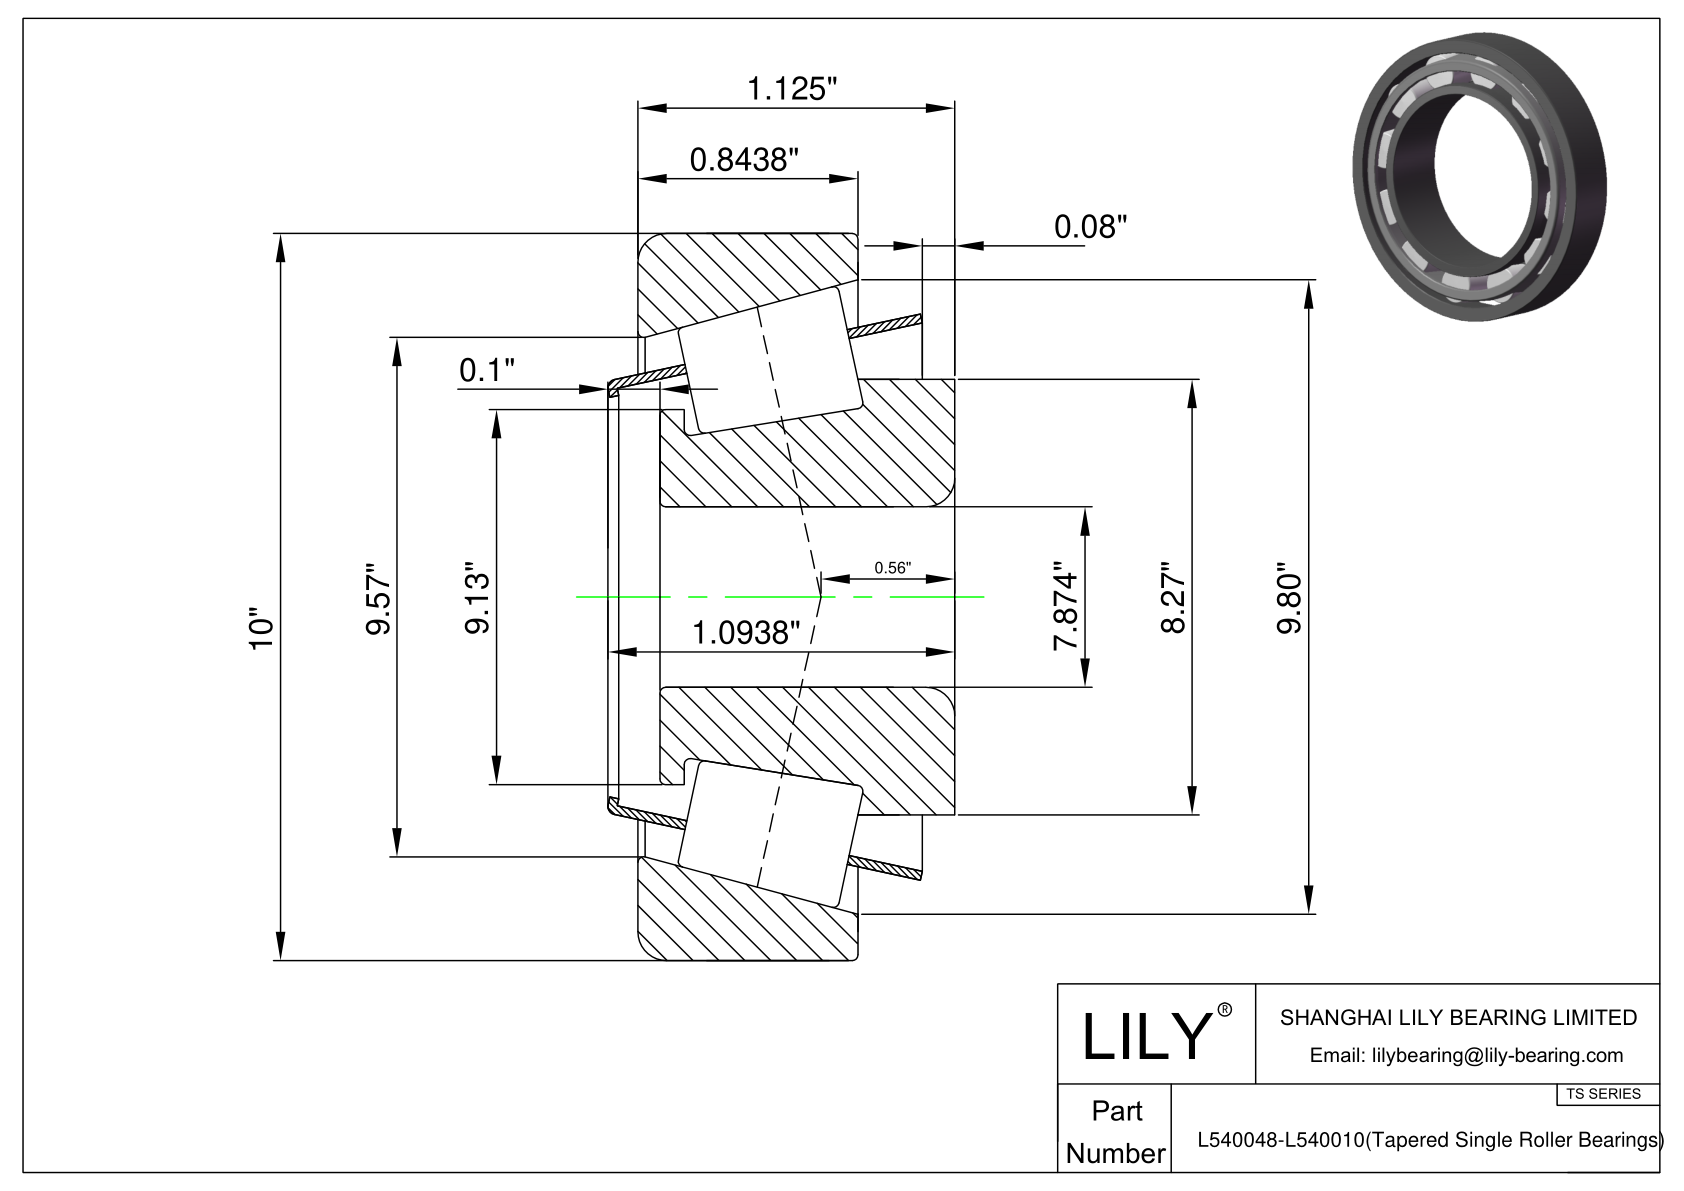 L540048-L540010 TS (Tapered Single Roller Bearings) (Imperial) cad drawing